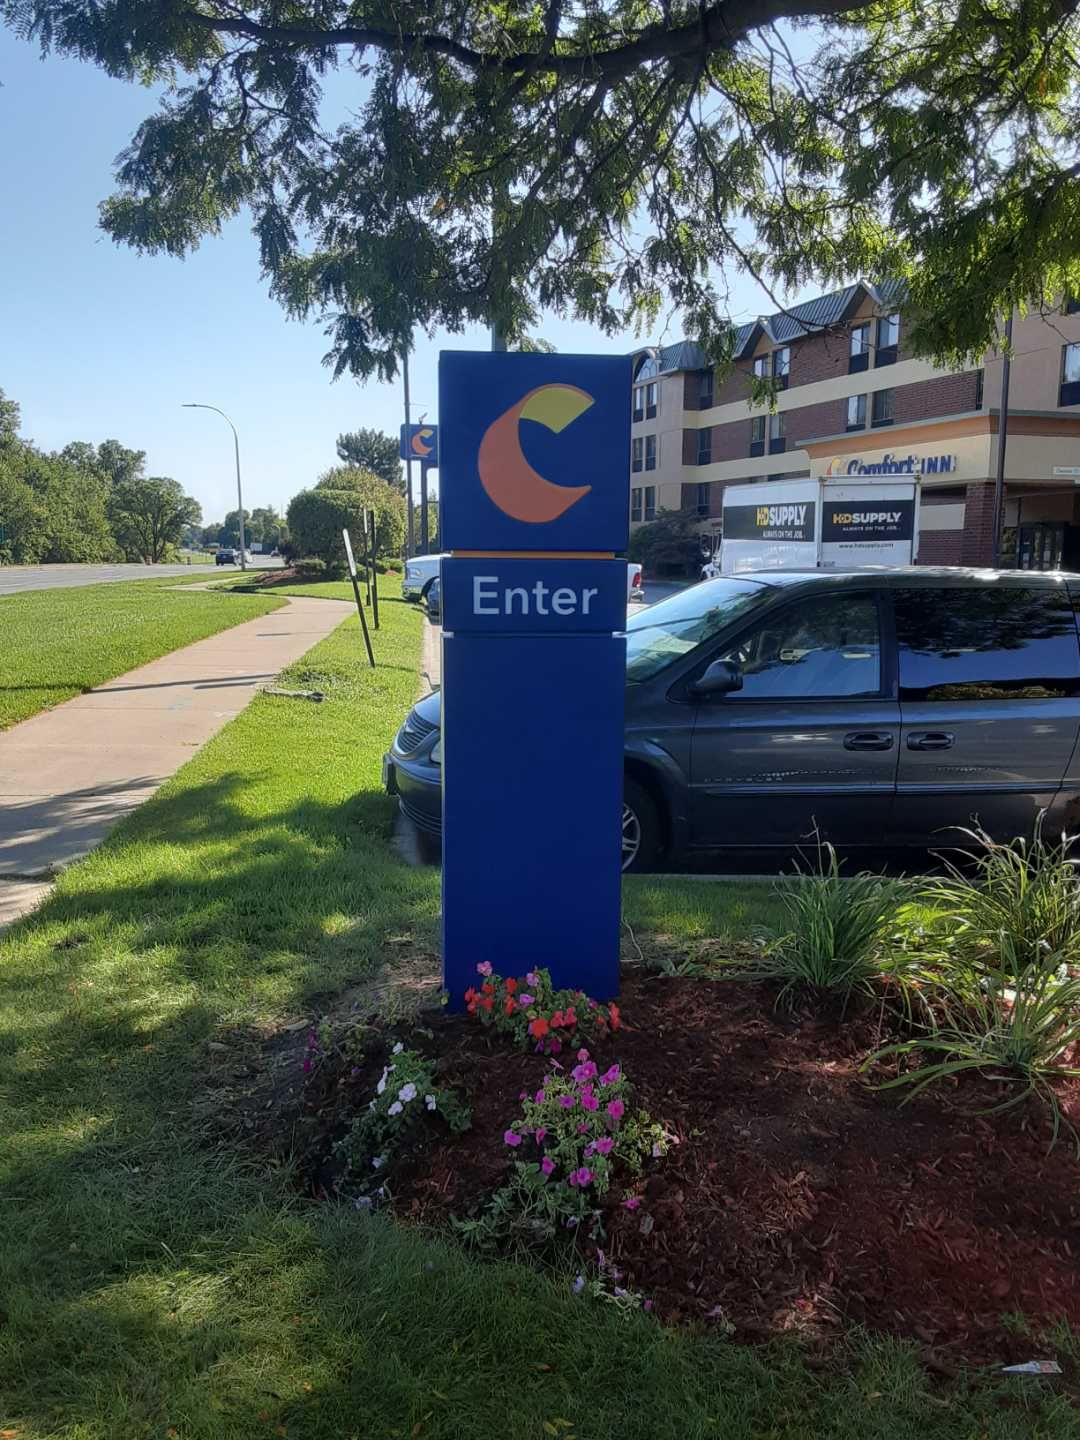 Comfort Inn Directional Hotel Wayfinding Enter Sign Blue and Yellow and Orange